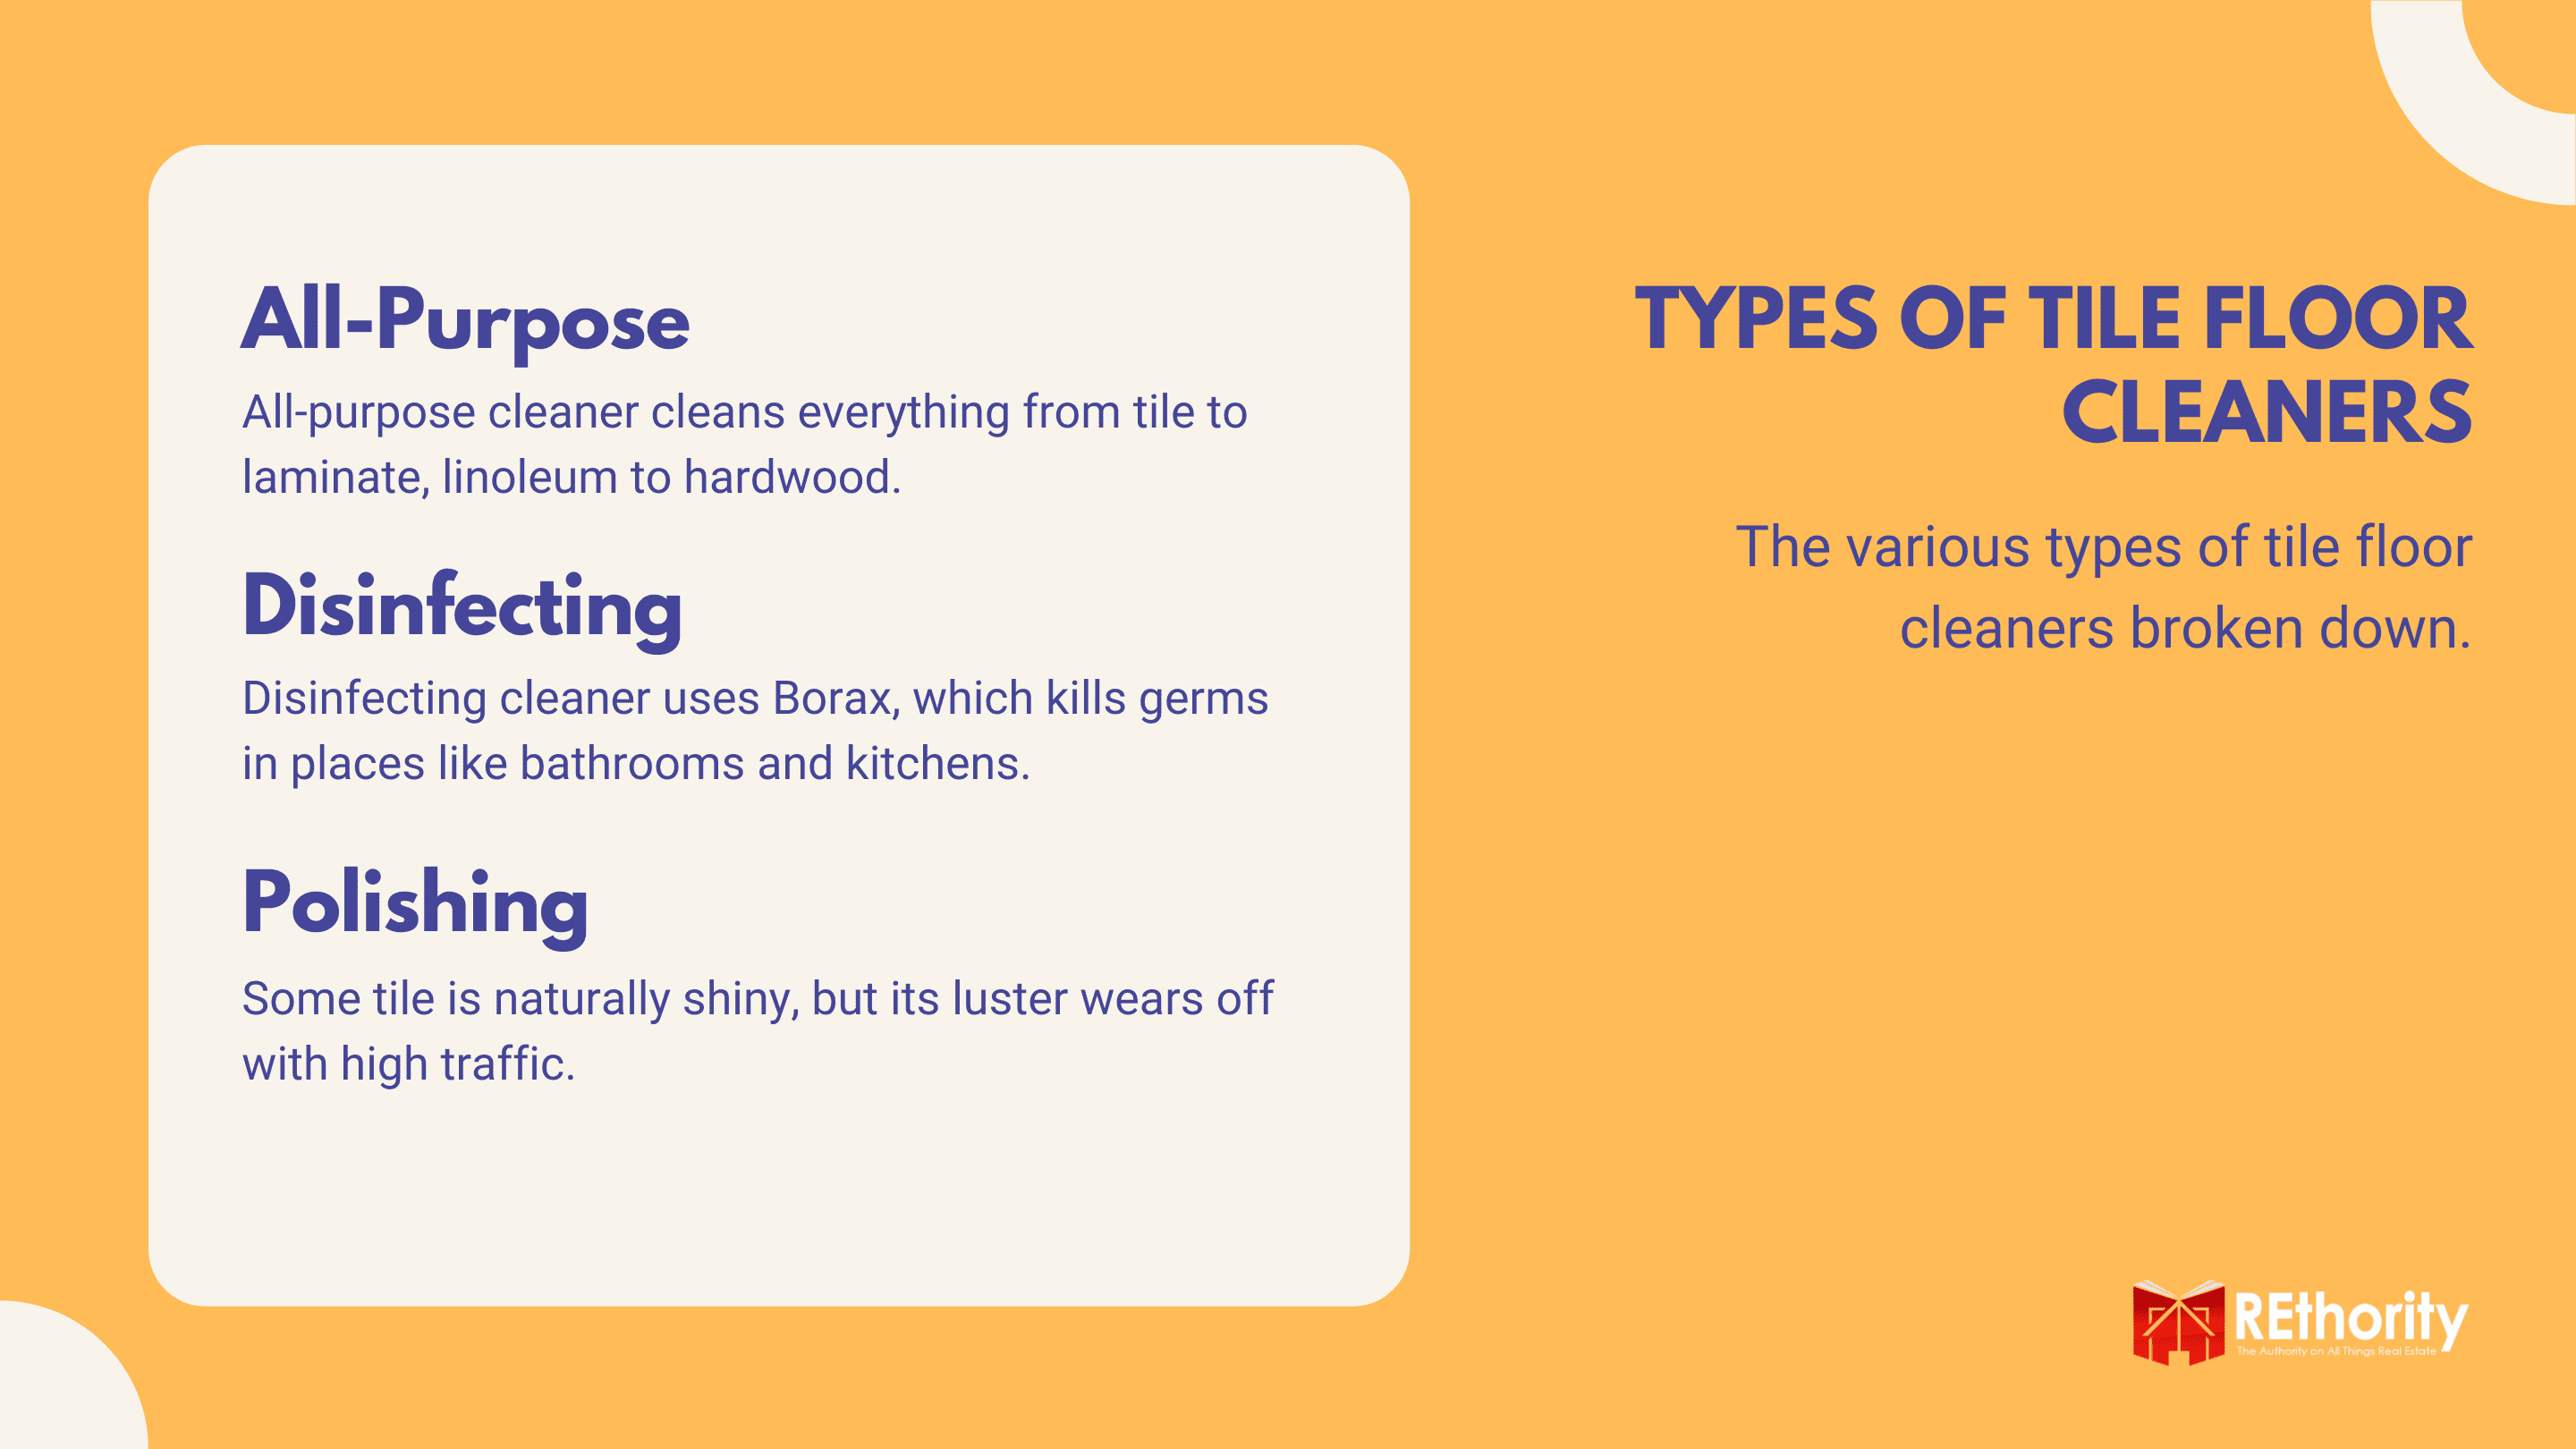 Types of Tile Floor Cleaner graphic